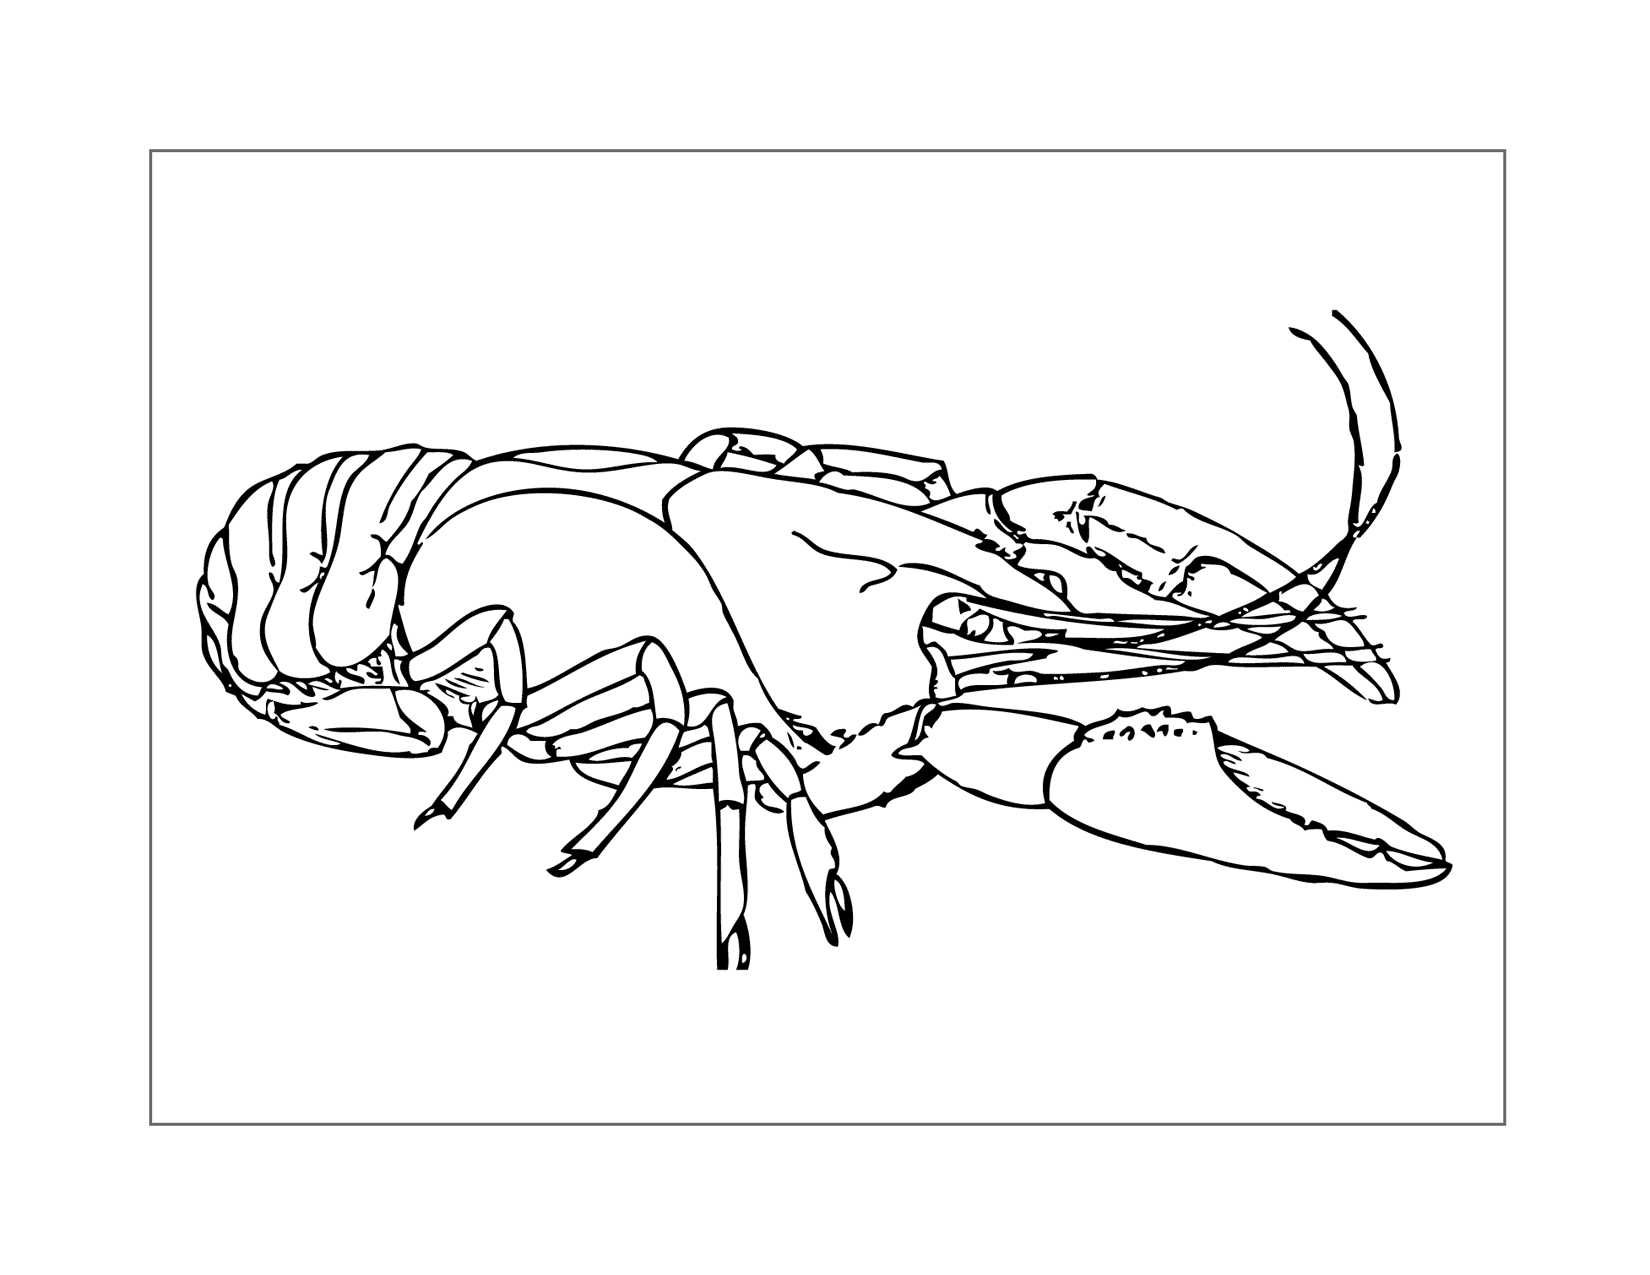 Easy Lobster Coloring Page